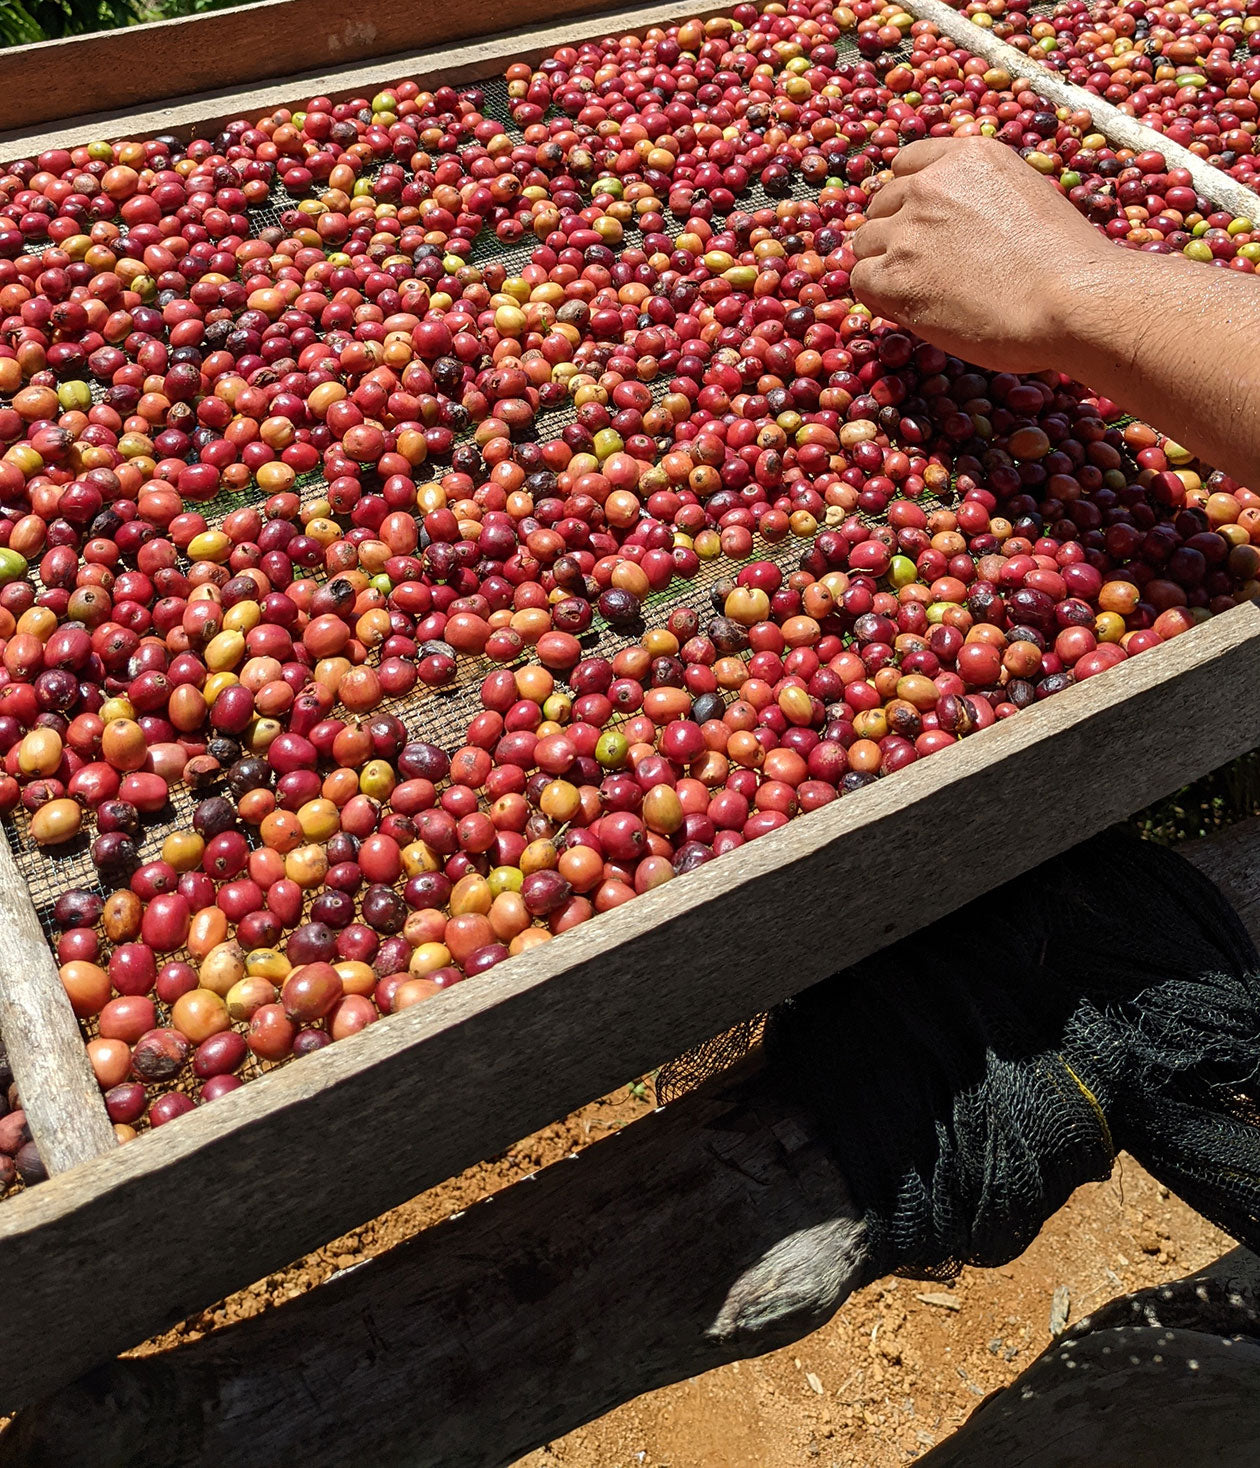 Coffee Craft: Processing the Cherries